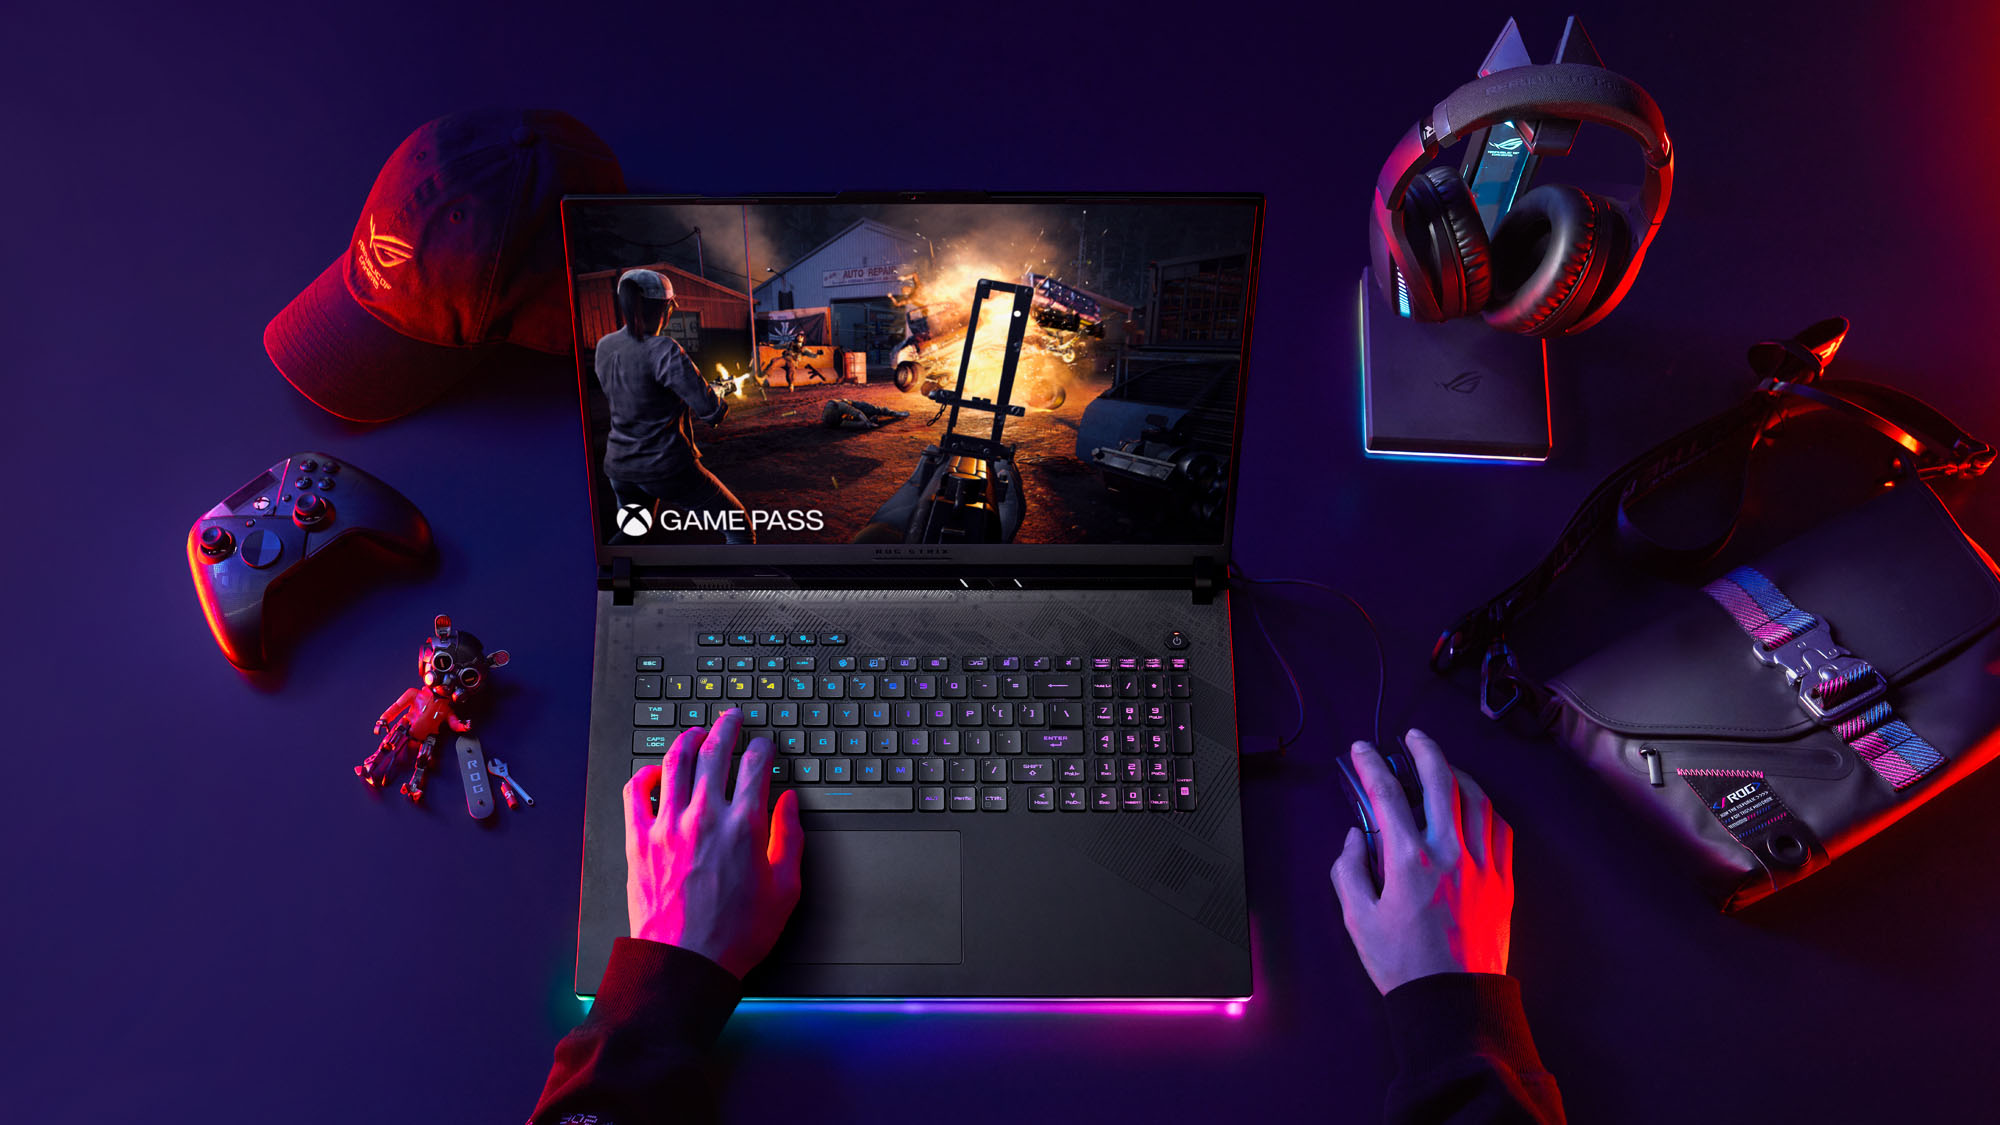 The ROG Strix SCAR 16 on a table with two hands visible playing video games.